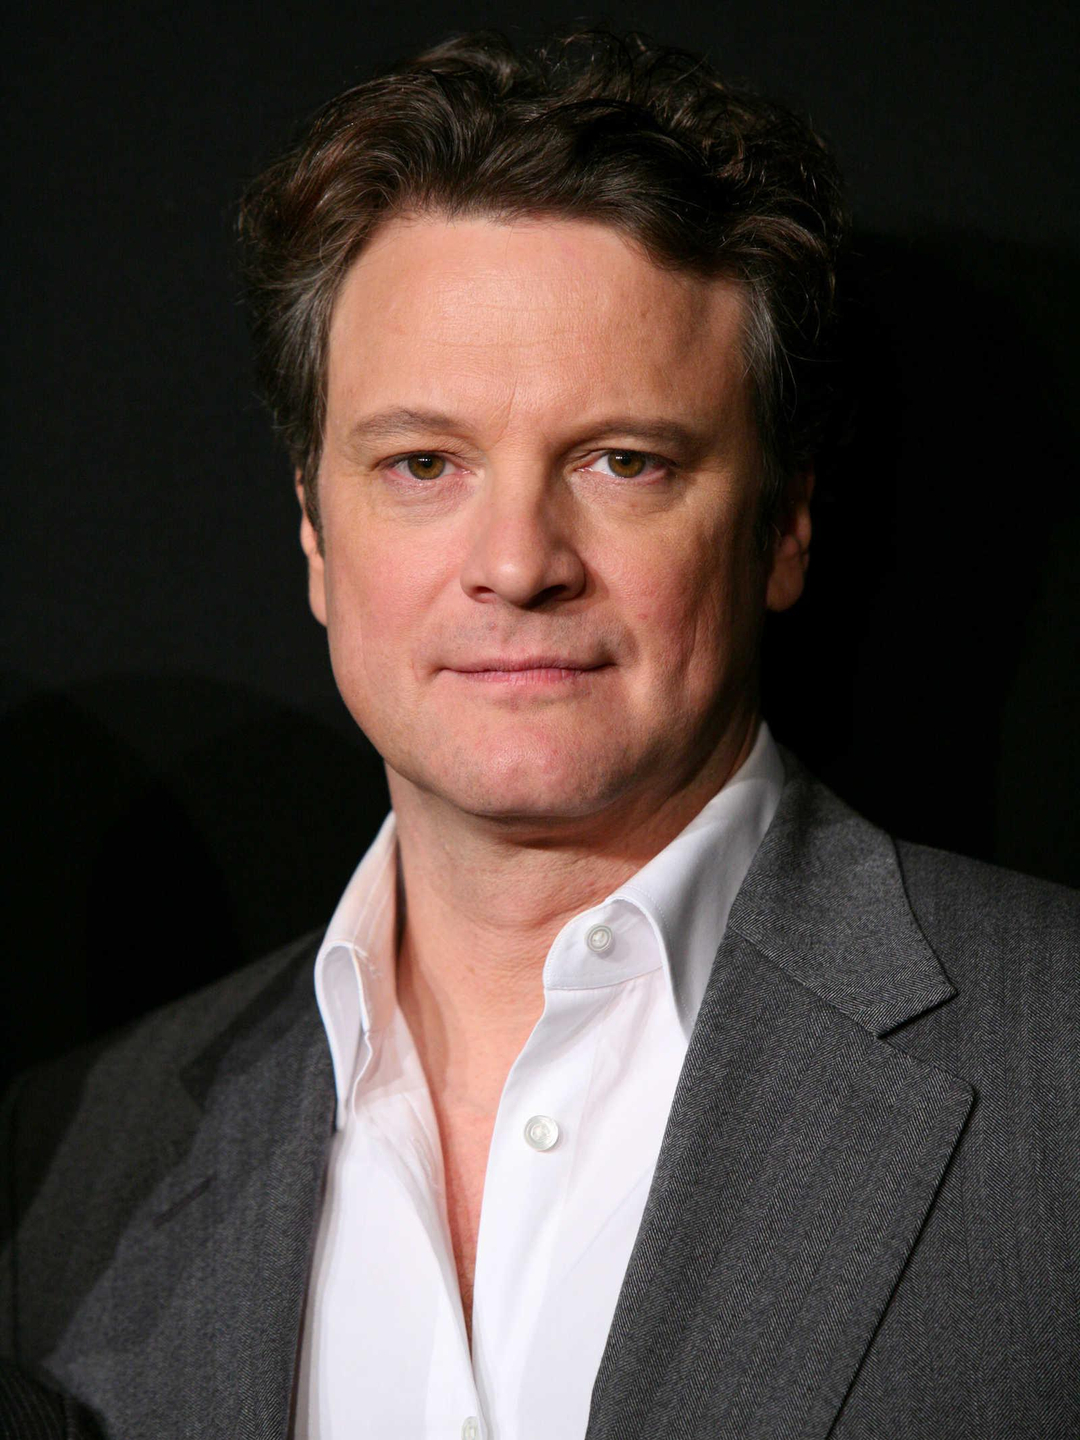 Colin Firth who are his parents